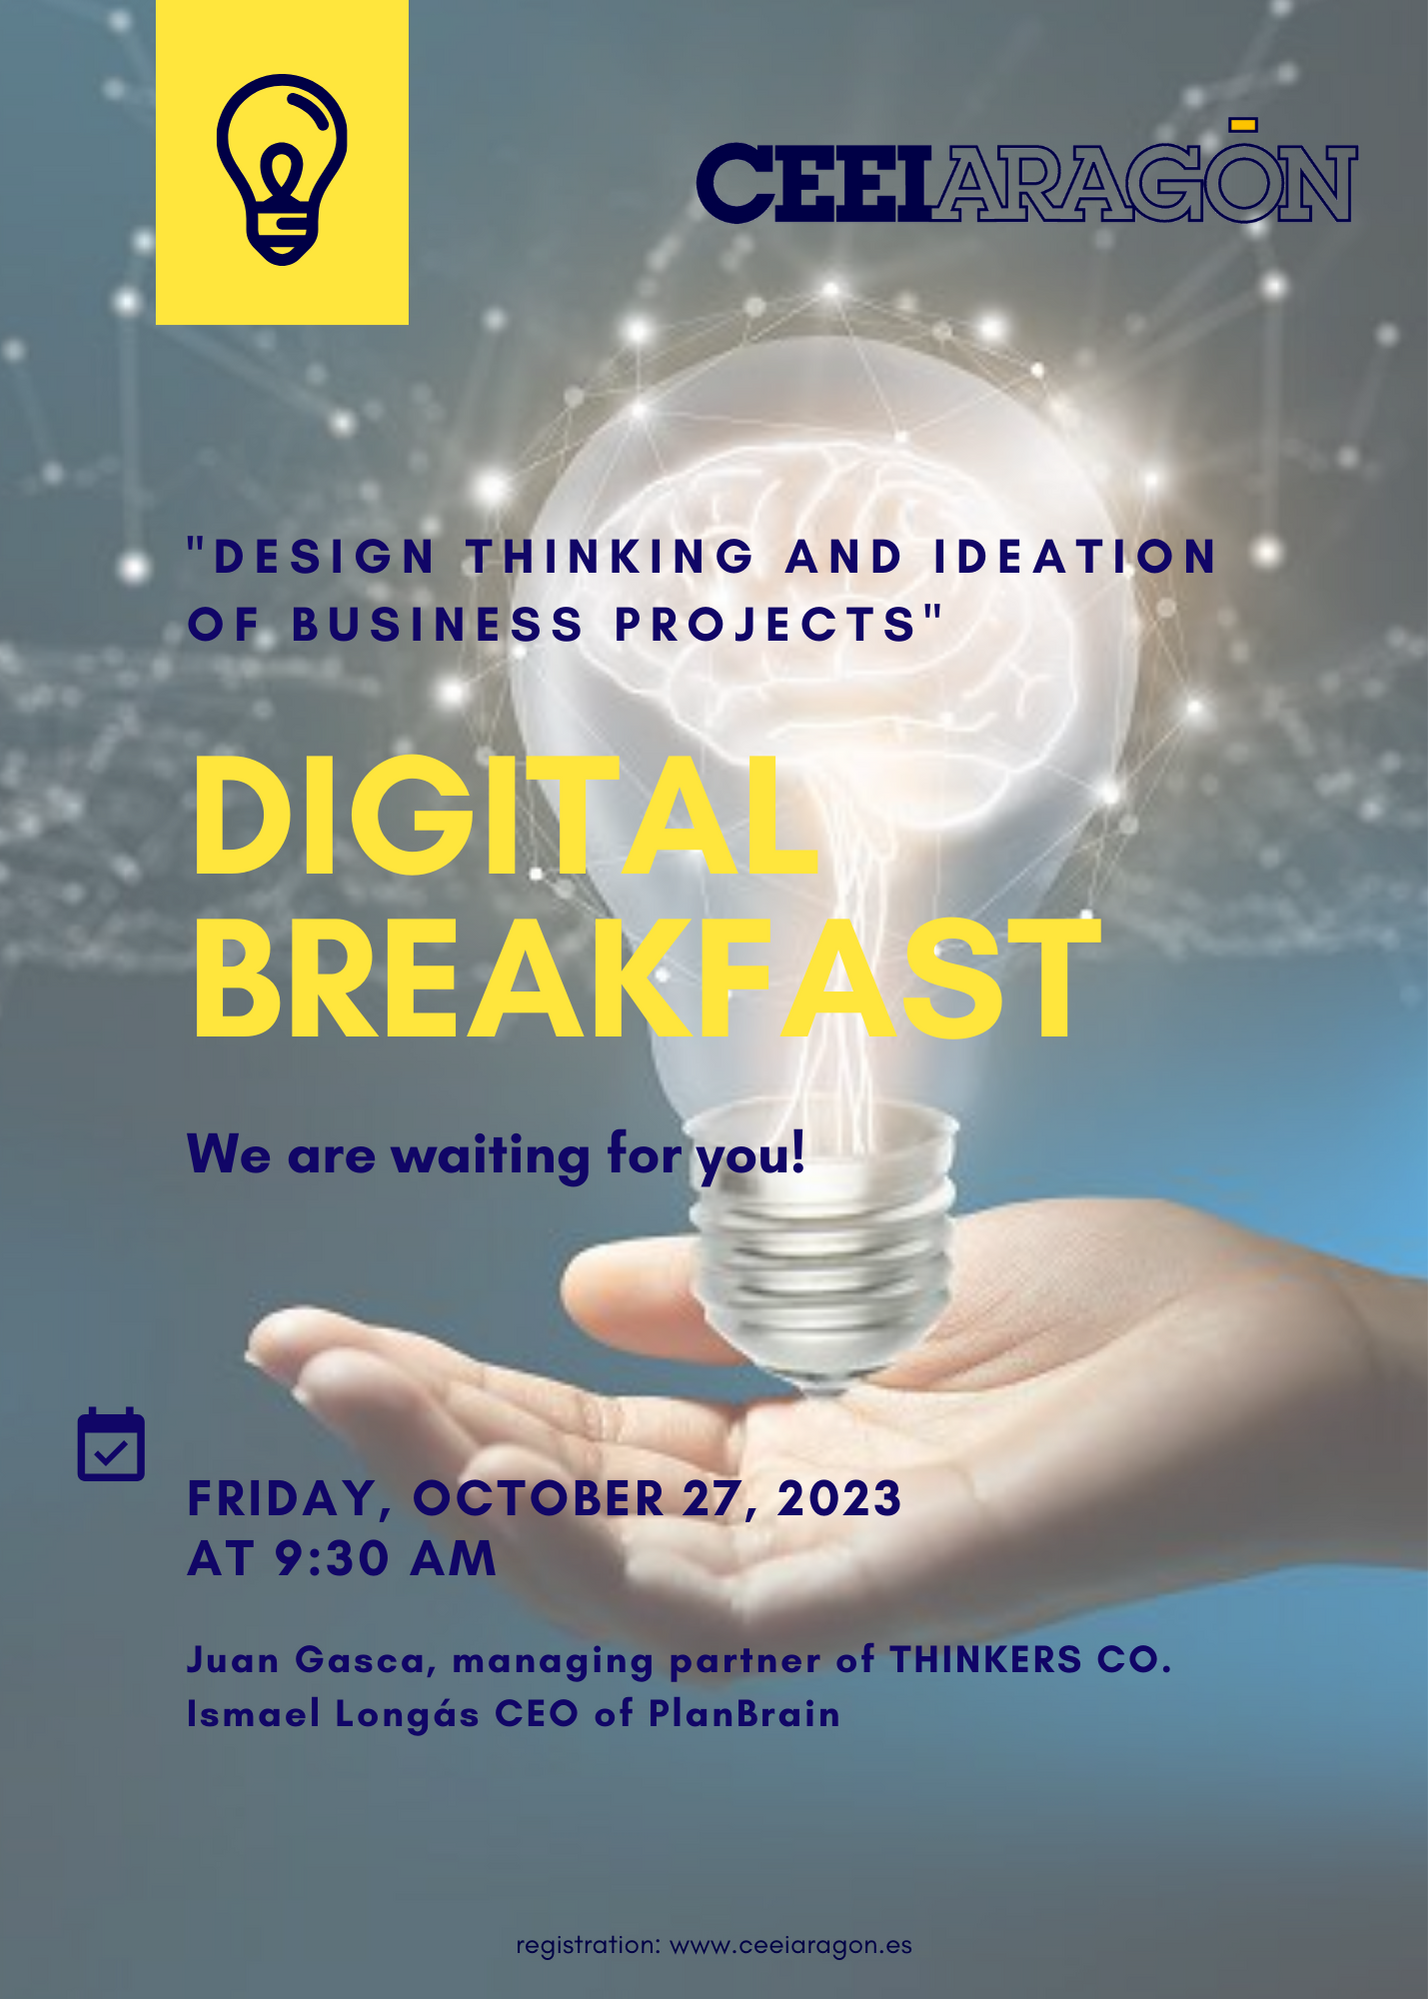 CEEI Digital Breakfast “Design Thinking and ideation of business projects”